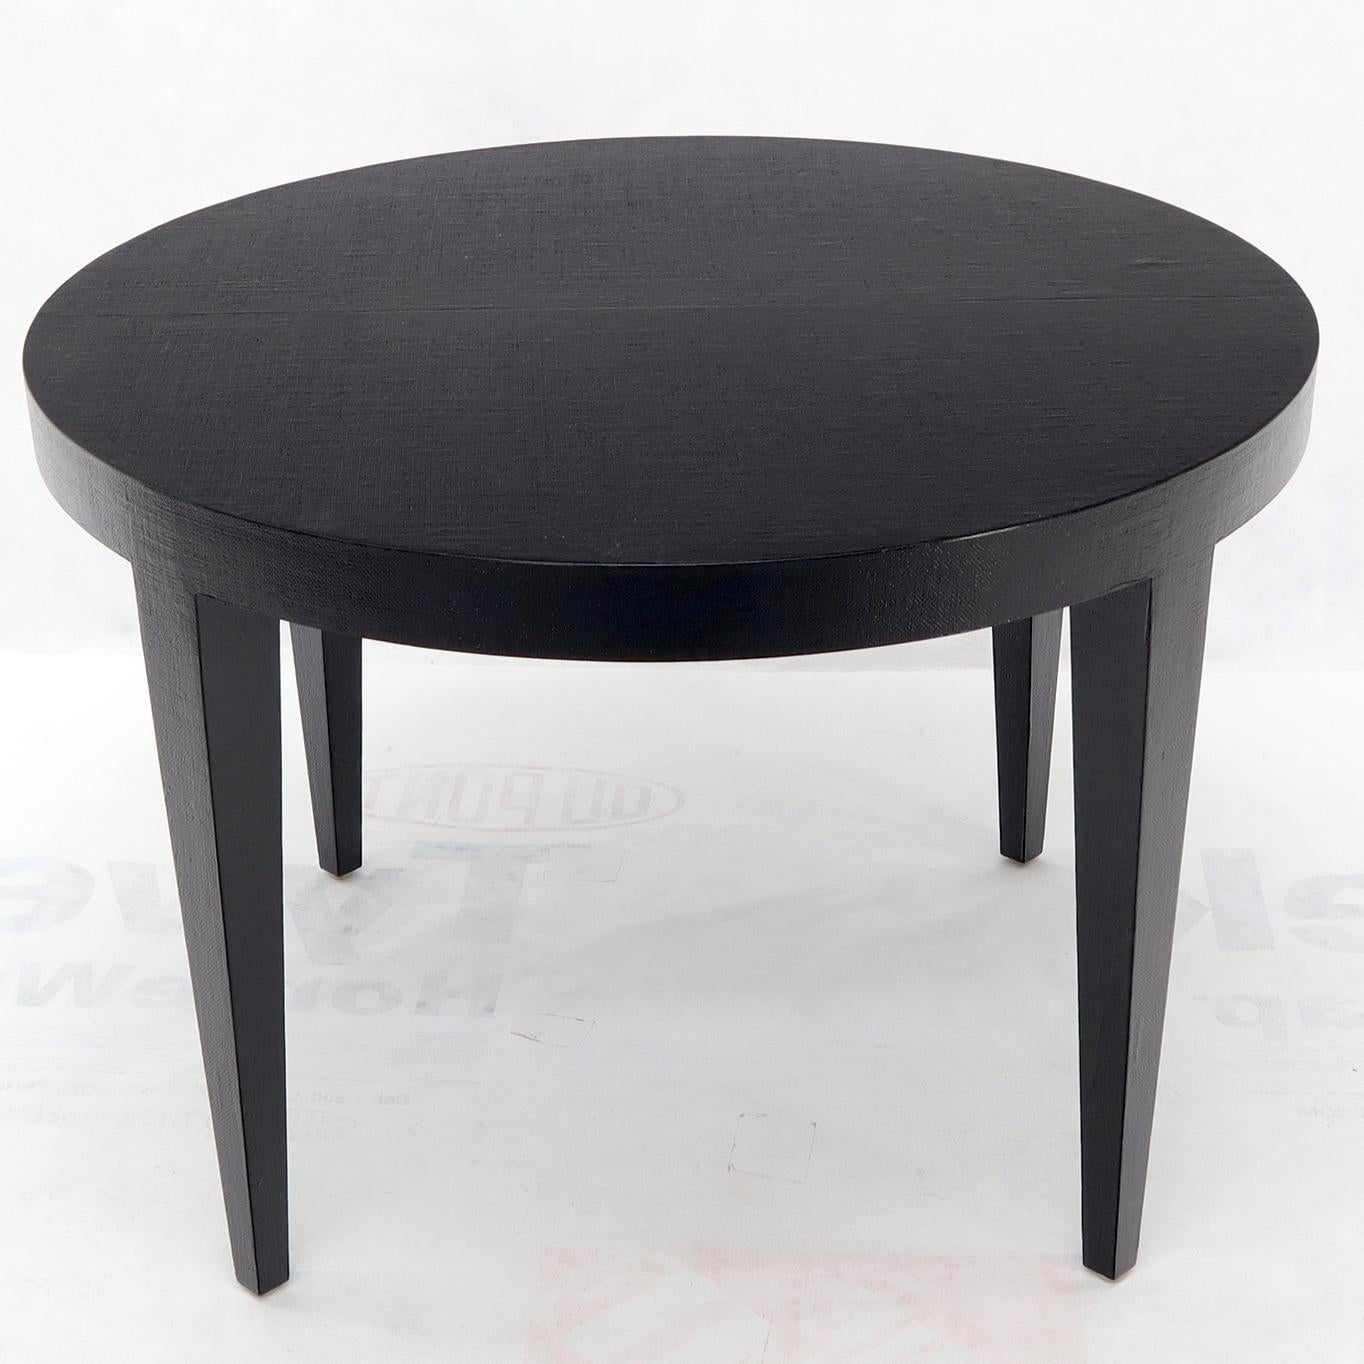 Lacquered Raffia Cloth Covered Black Lacquer Square Tapered Legs Dining Conference Table